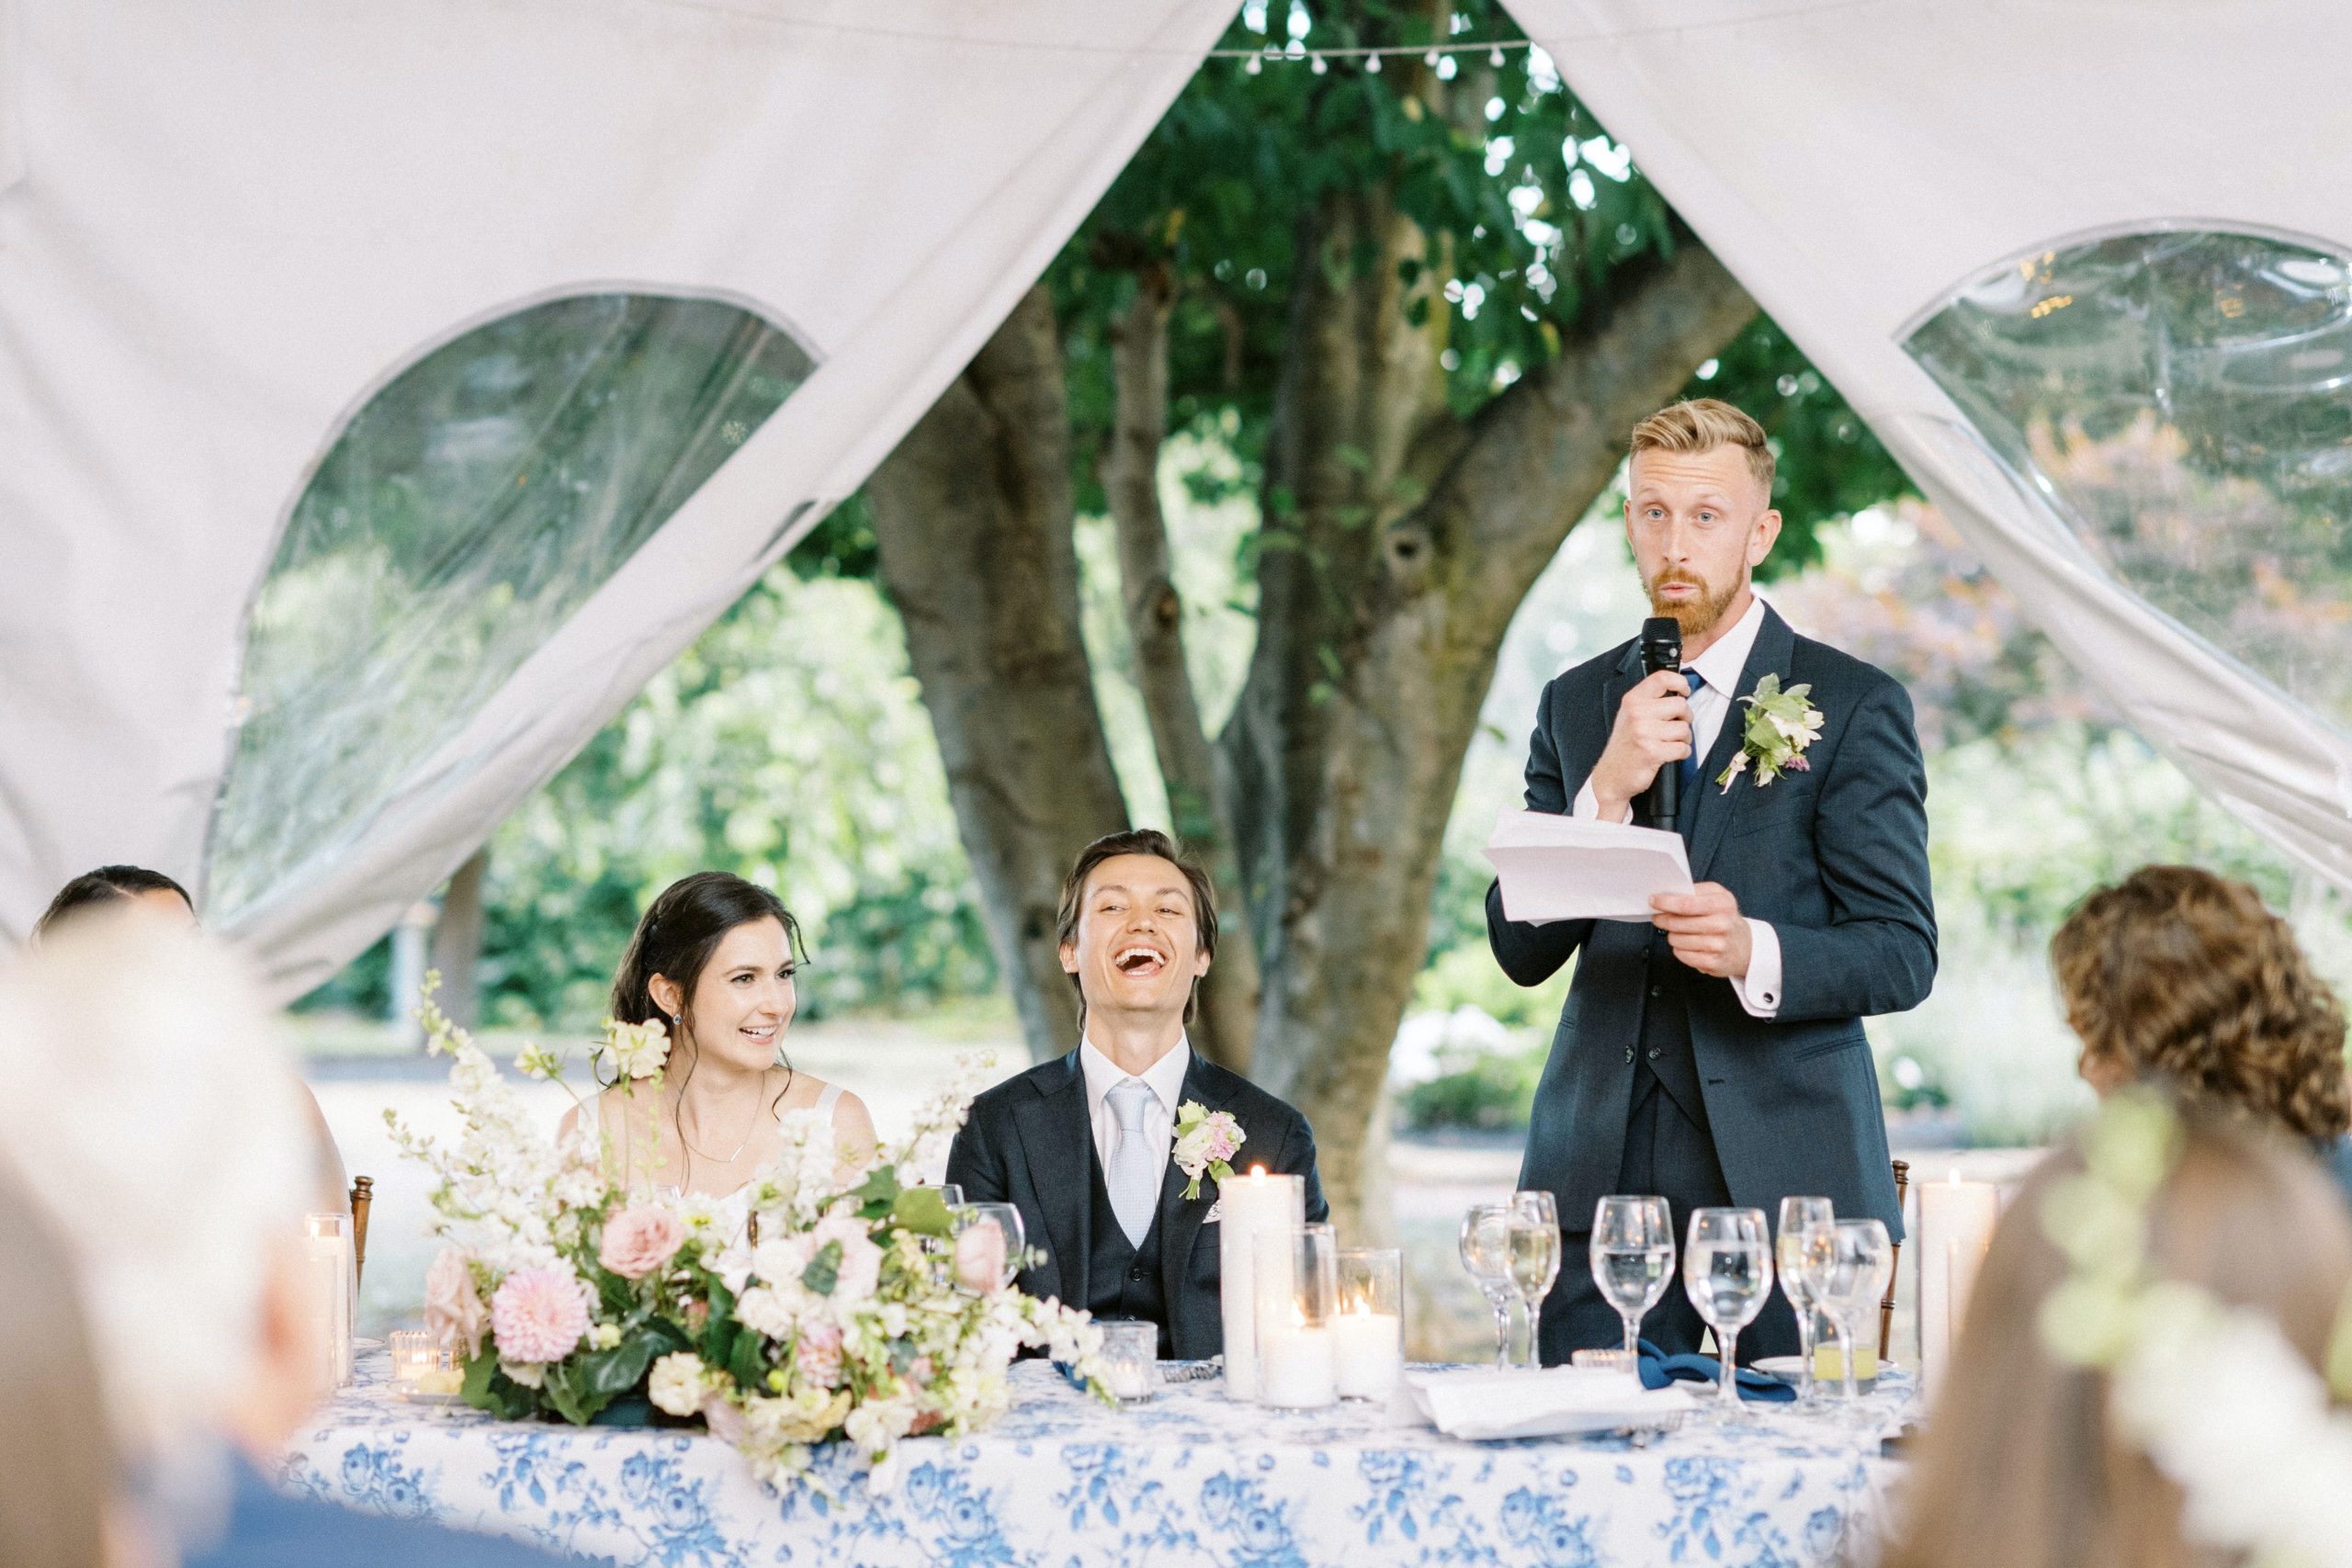 10 tips to a great wedding toast